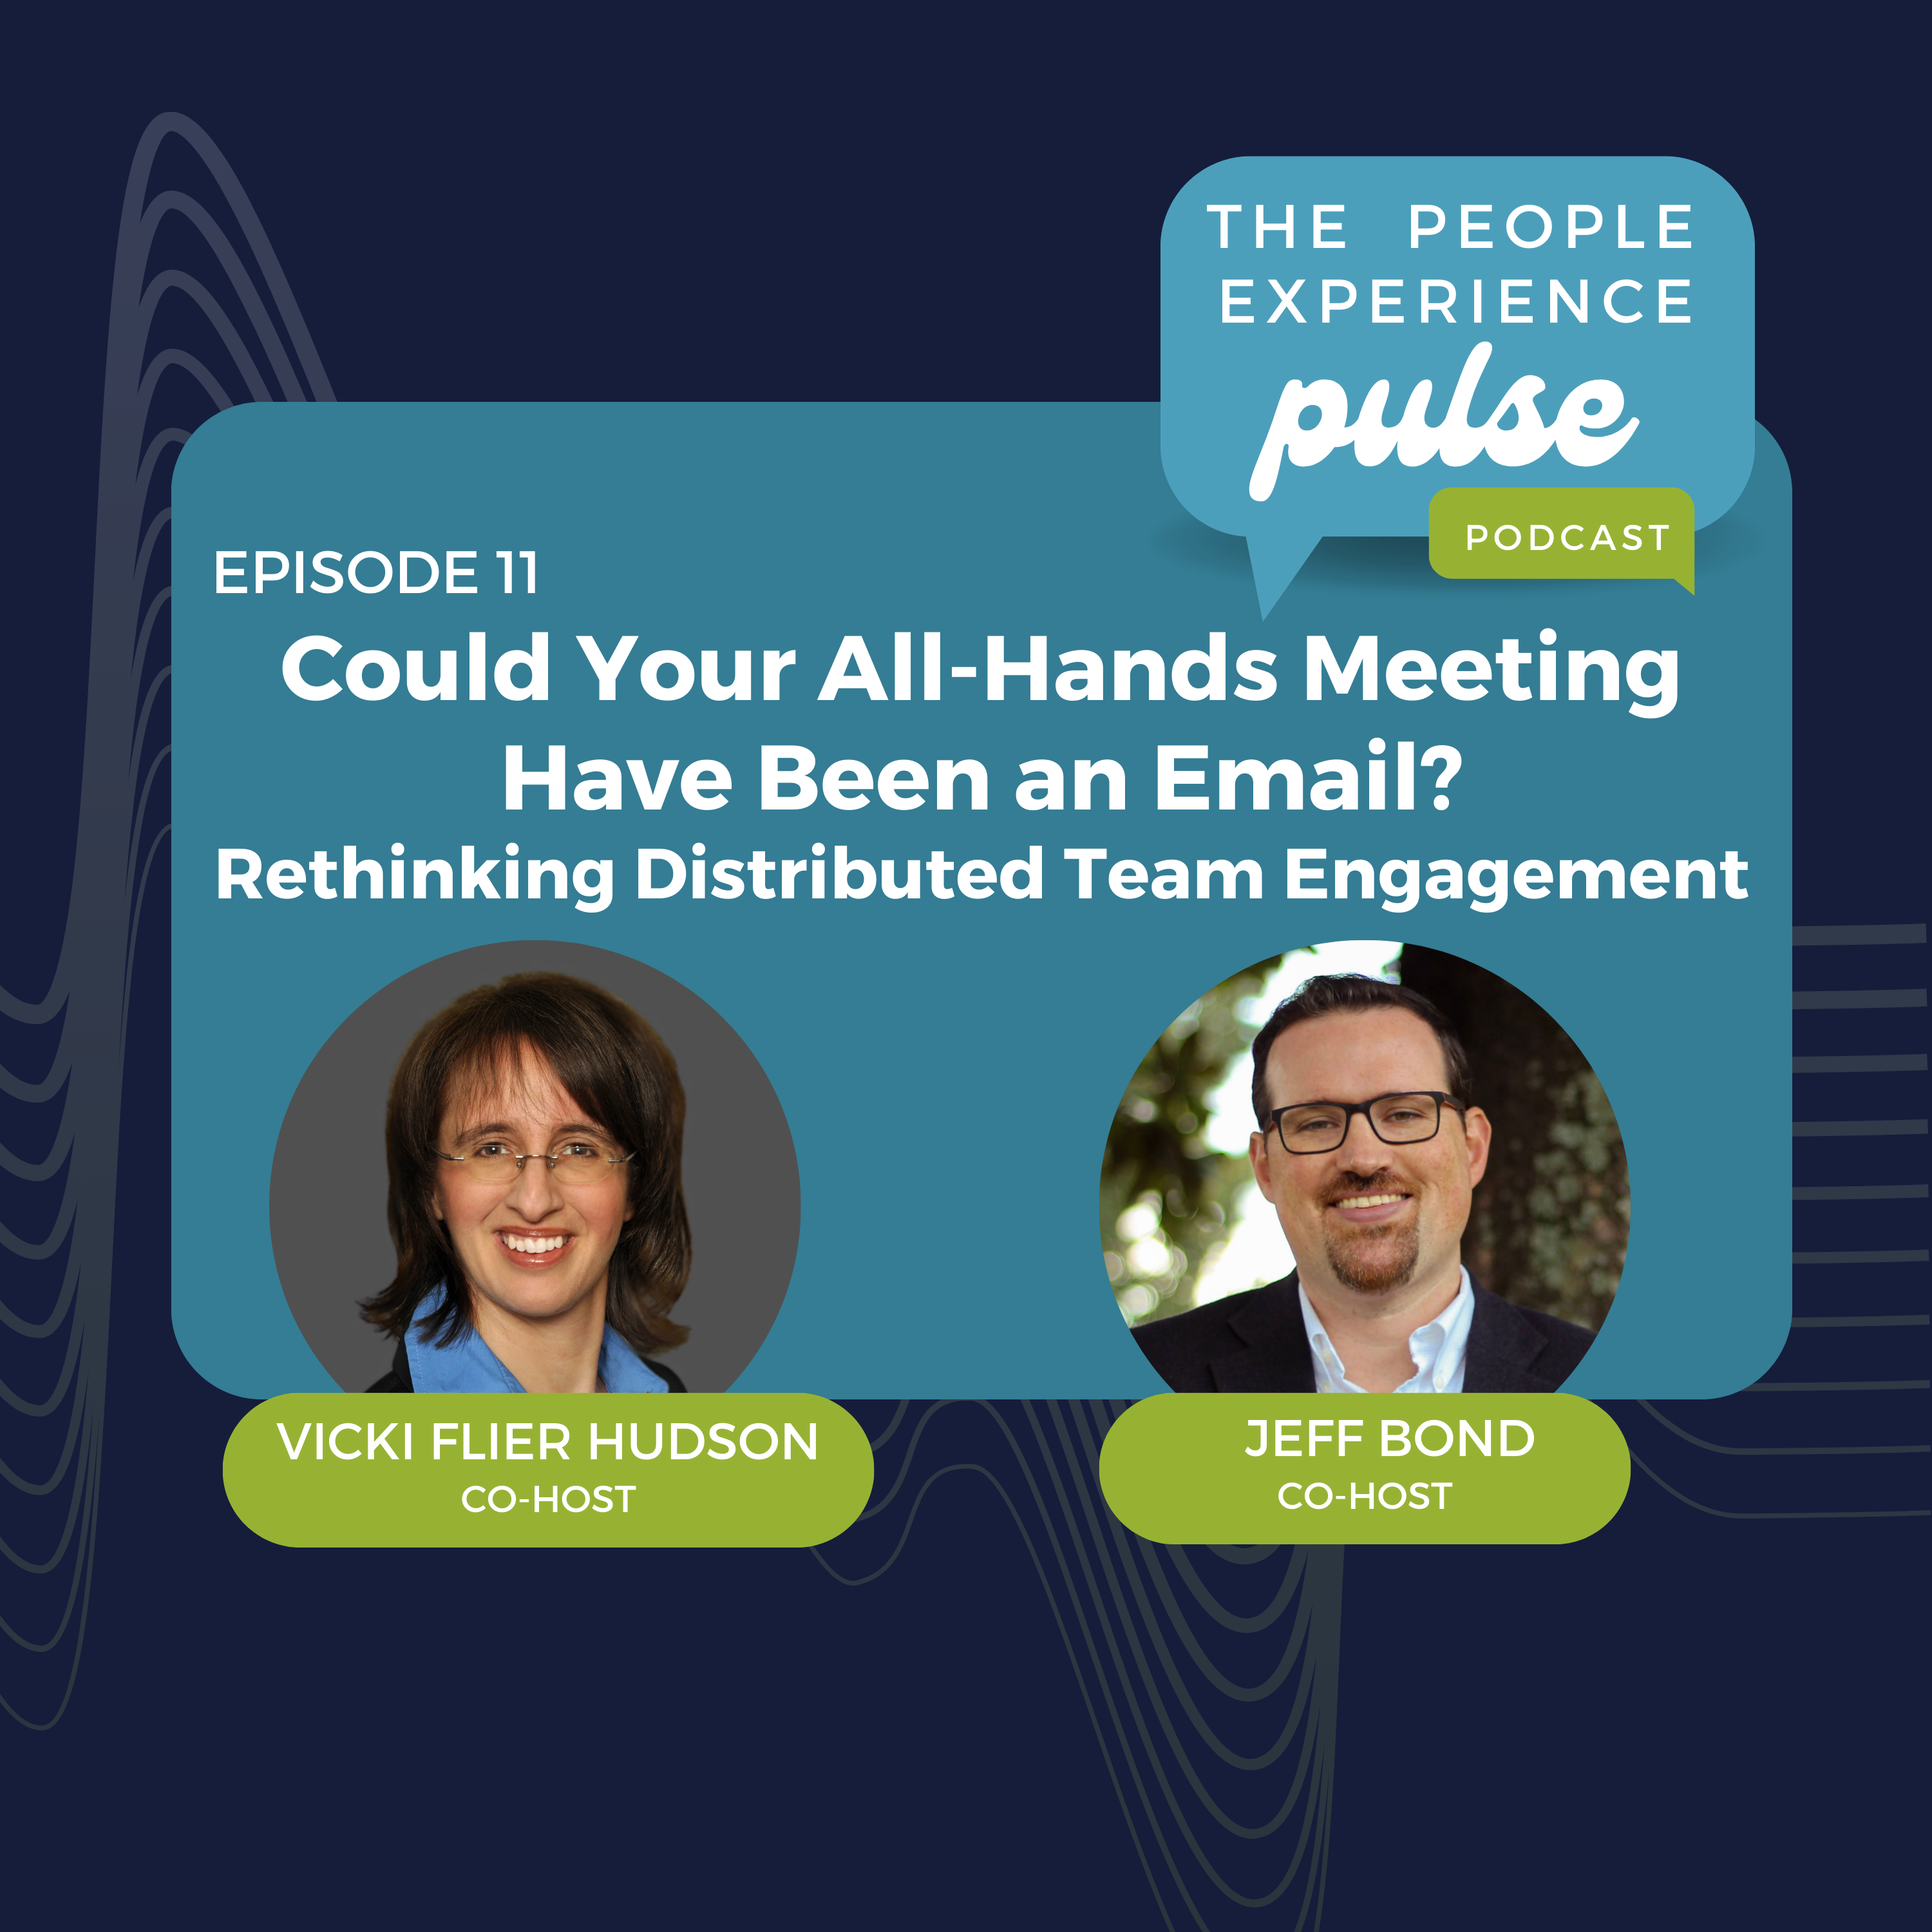 Could Your All-Hands Meeting Have Been an Email? Rethinking Distributed Team Engagement